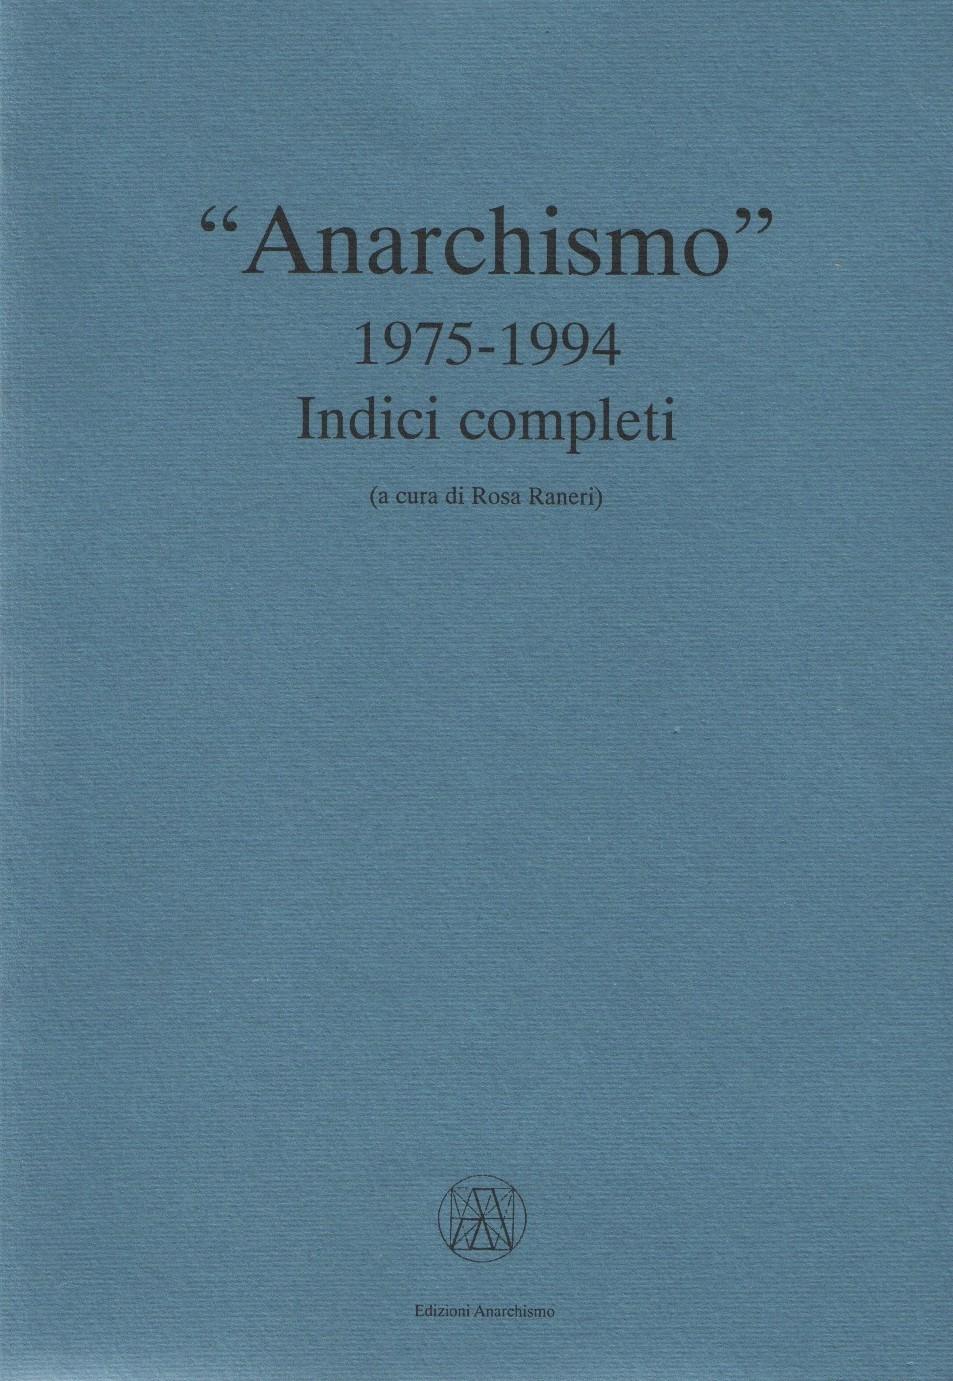 a-1-anarchismo-1975-1994-indici-completi-x-cover.jpg